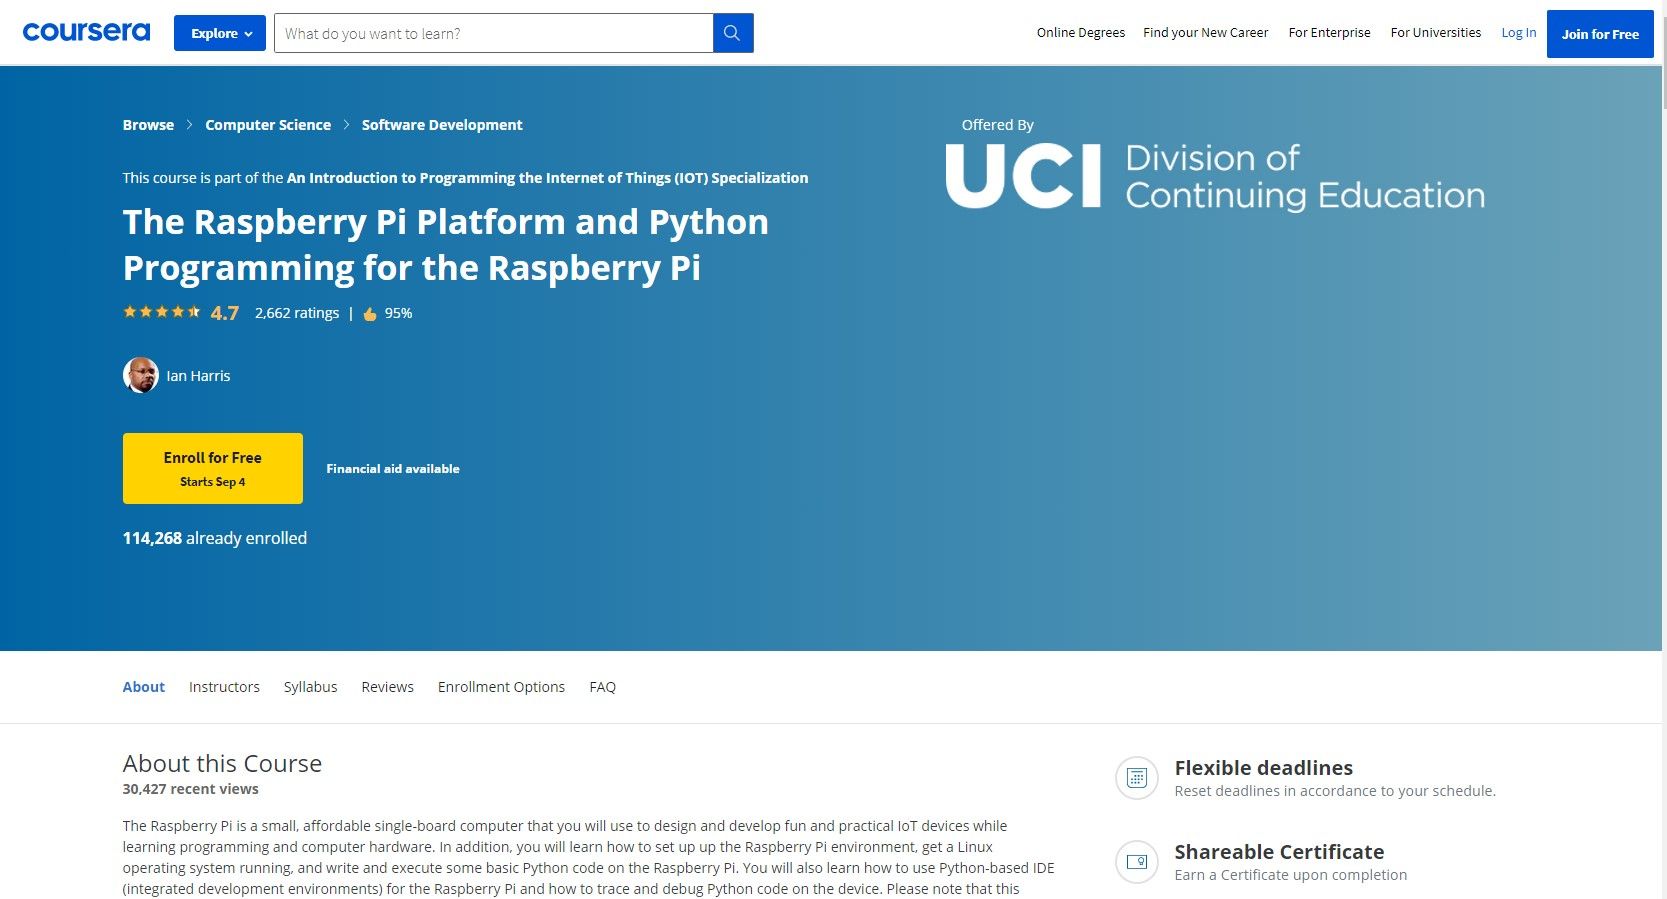 Coursera web page highlighting the course details for Raspberry Pi and Python course